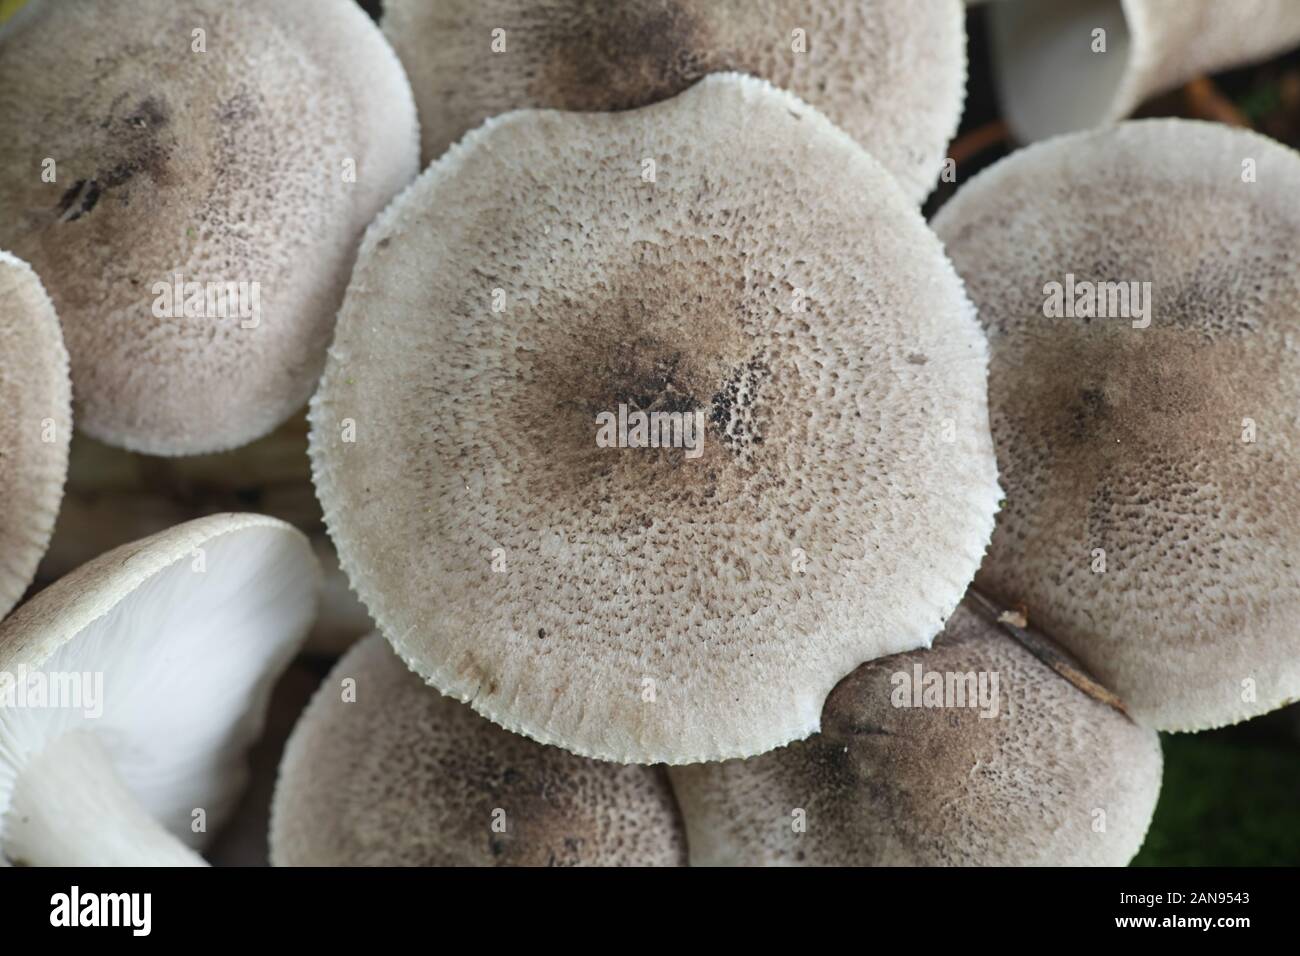 Tricholoma scalpturatum, known as the Yellowing Knight mushroom, mushrooms from Finland Stock Photo